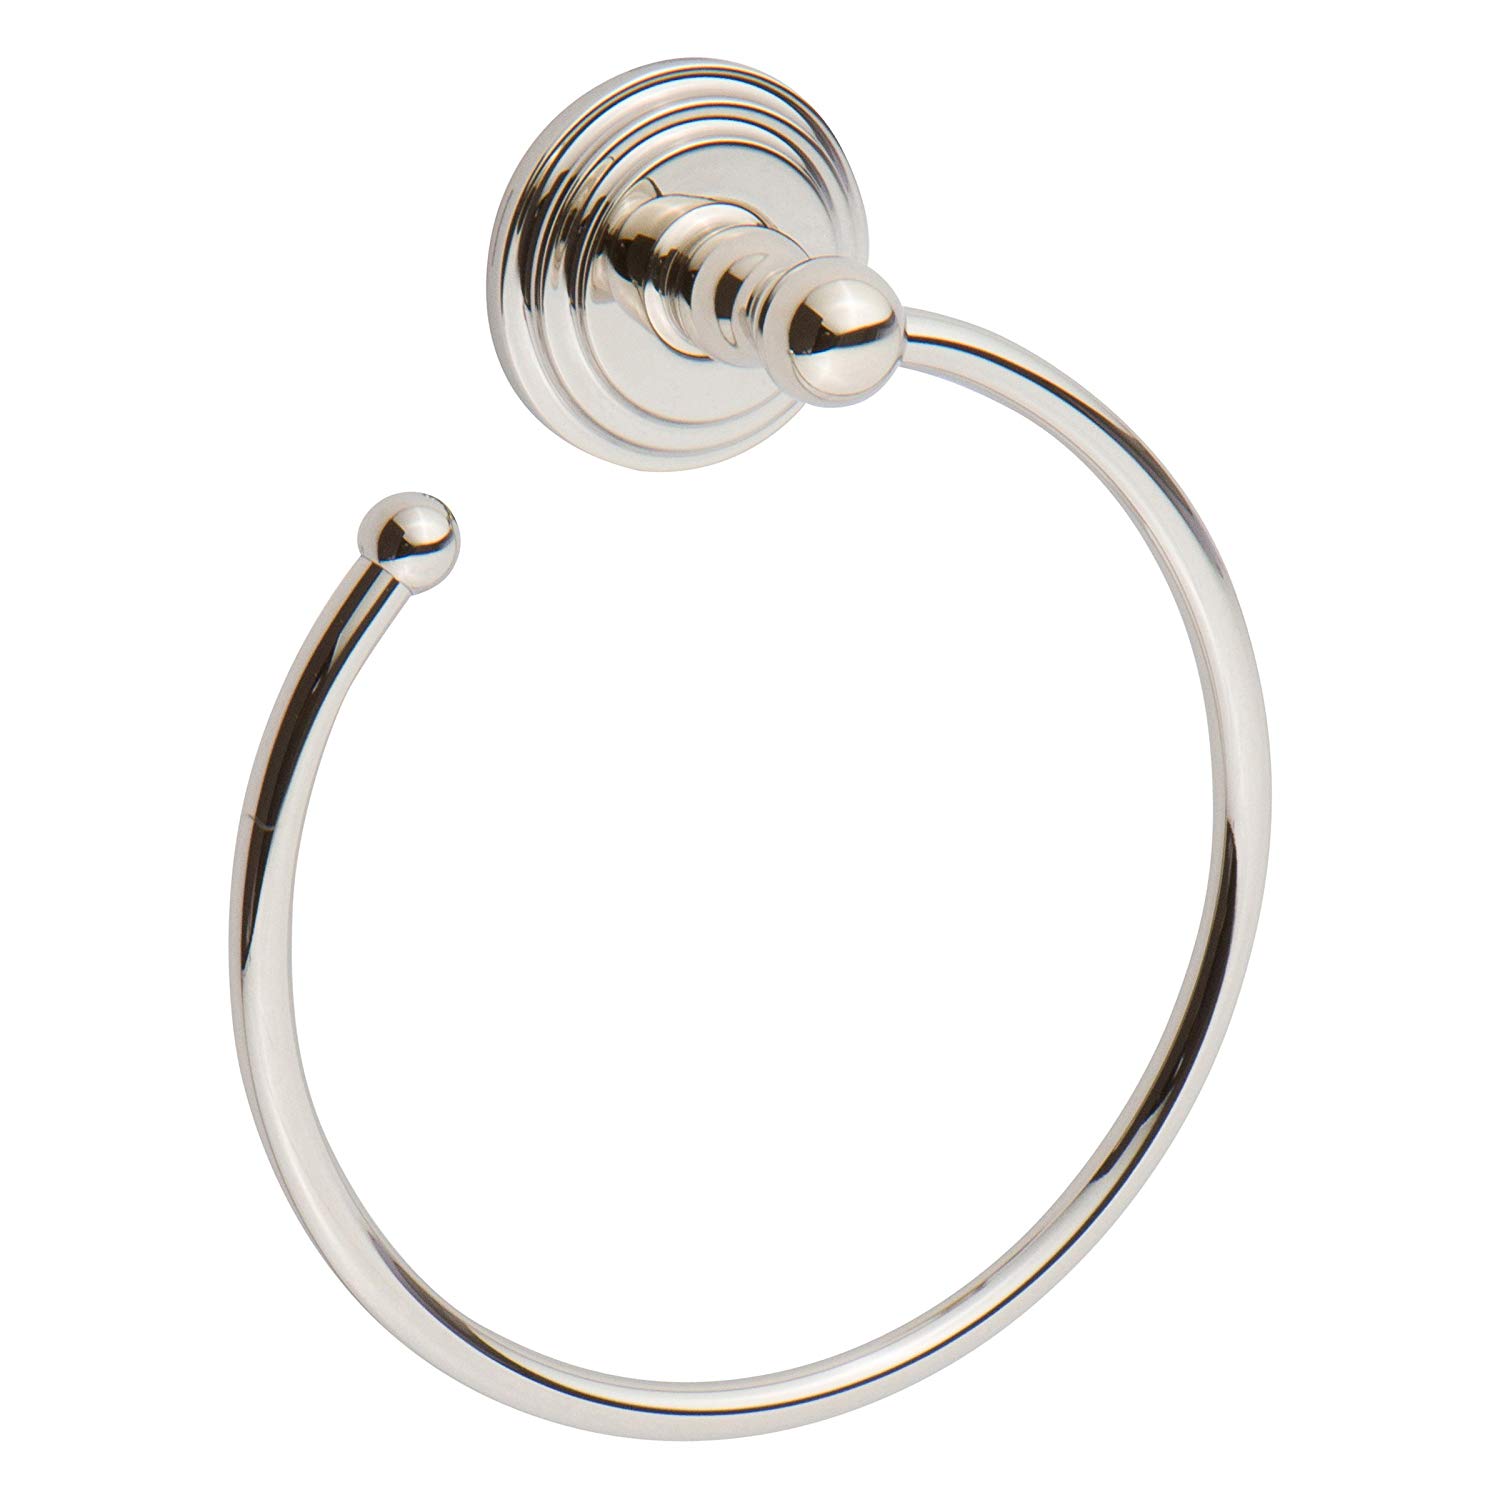 Chelsea Open Towel Ring in Polished Nickel